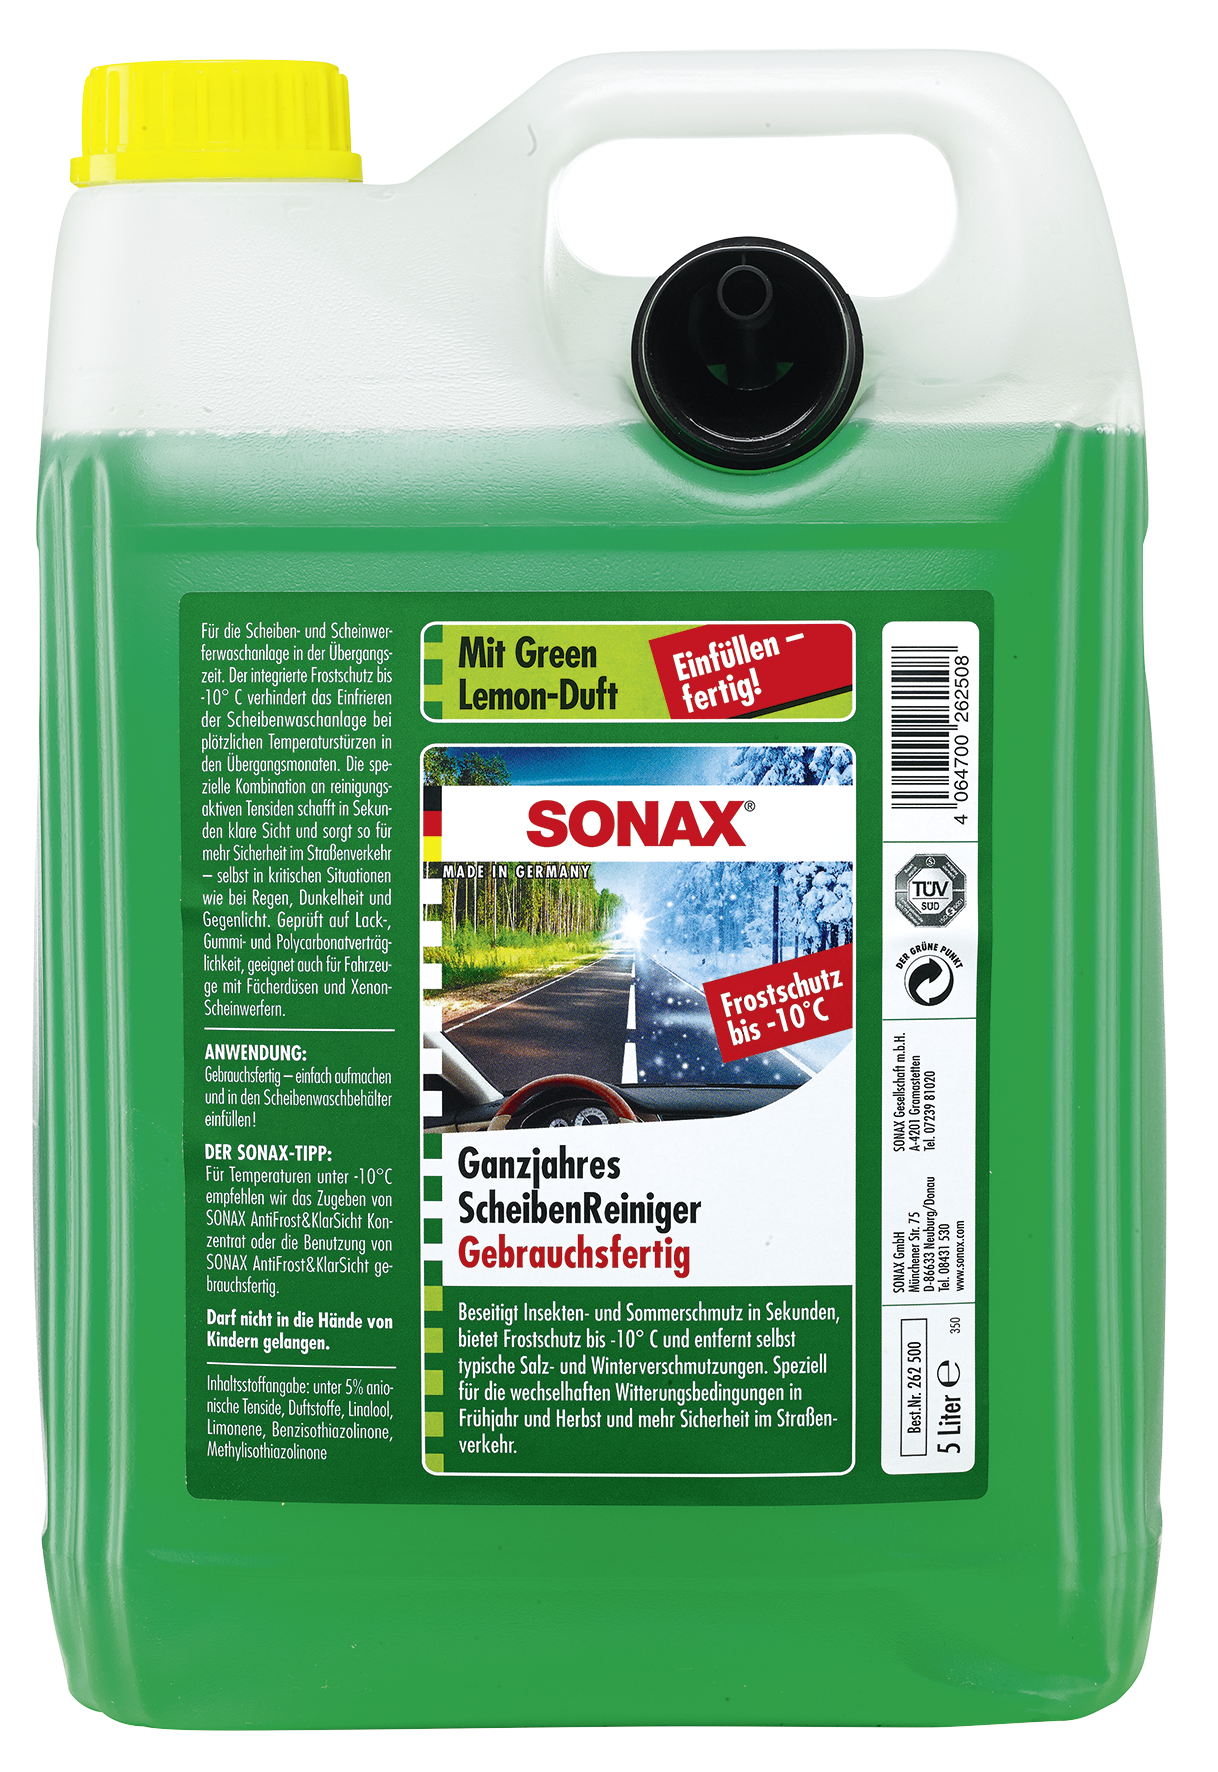 Product image download - SONAX Media - site 2